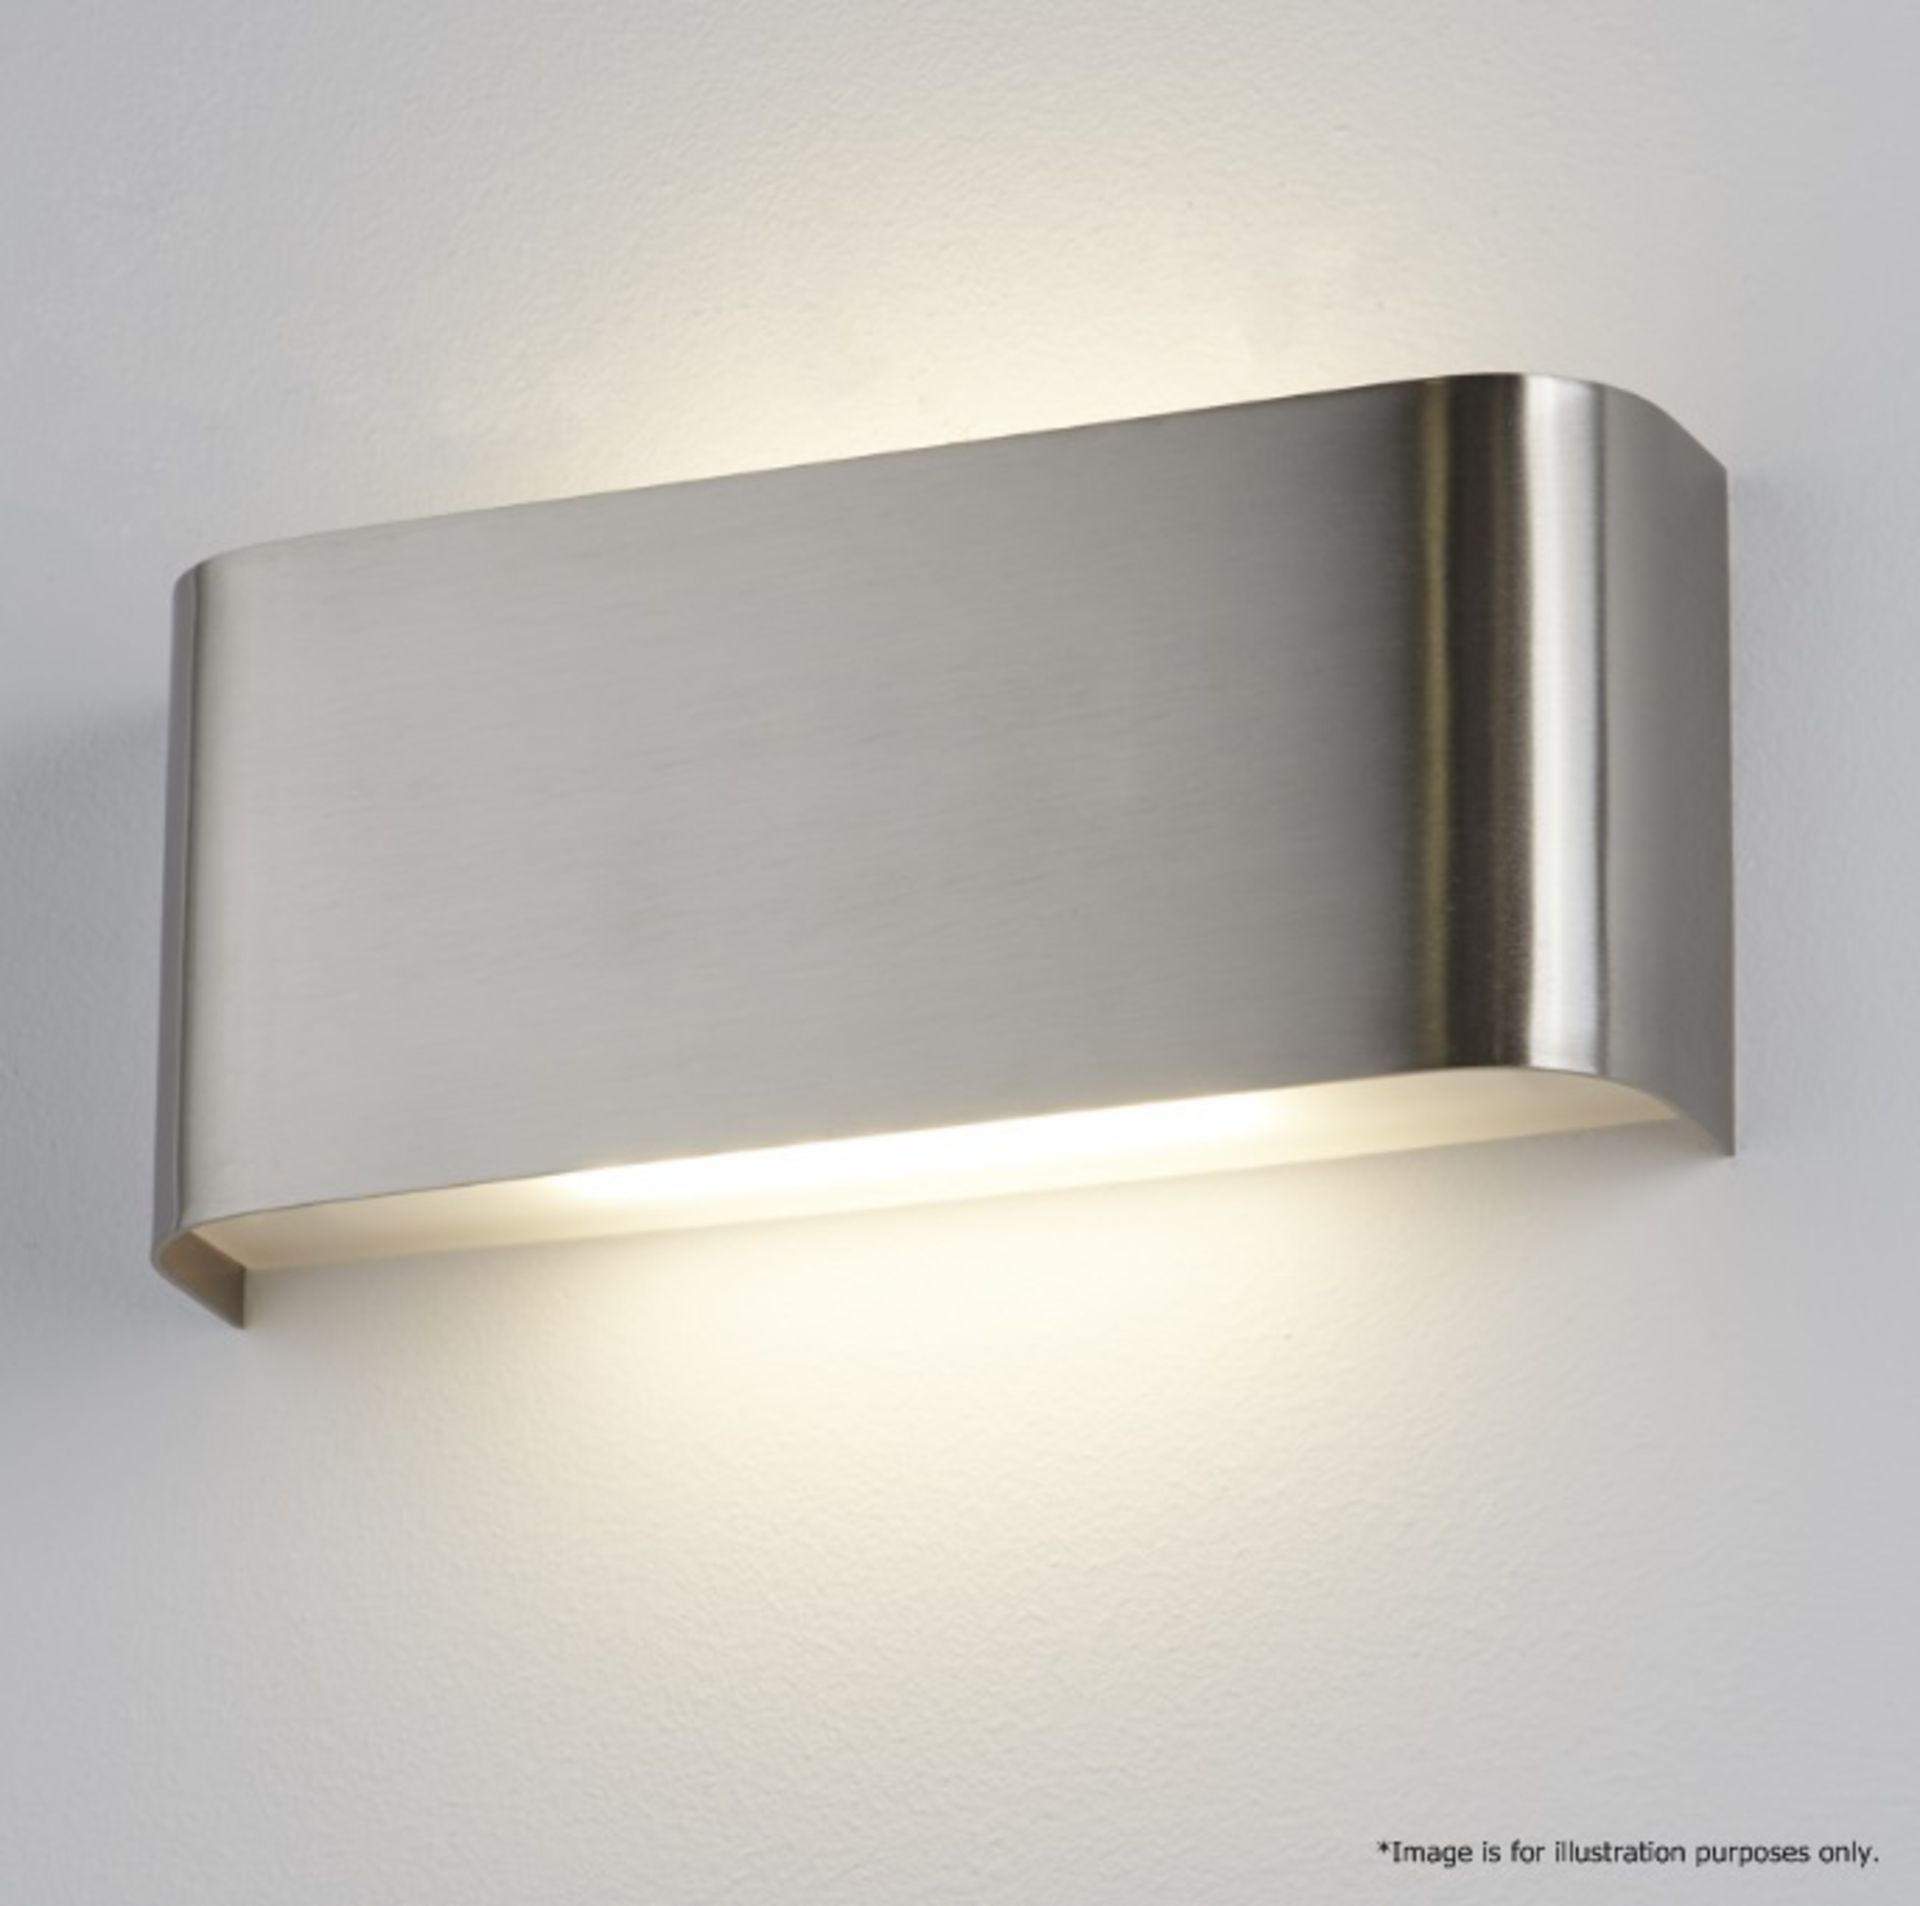 1 x Satin Silver Oblong Curved Wall Light With Up & Down 2 Light LED - RRP £96.00